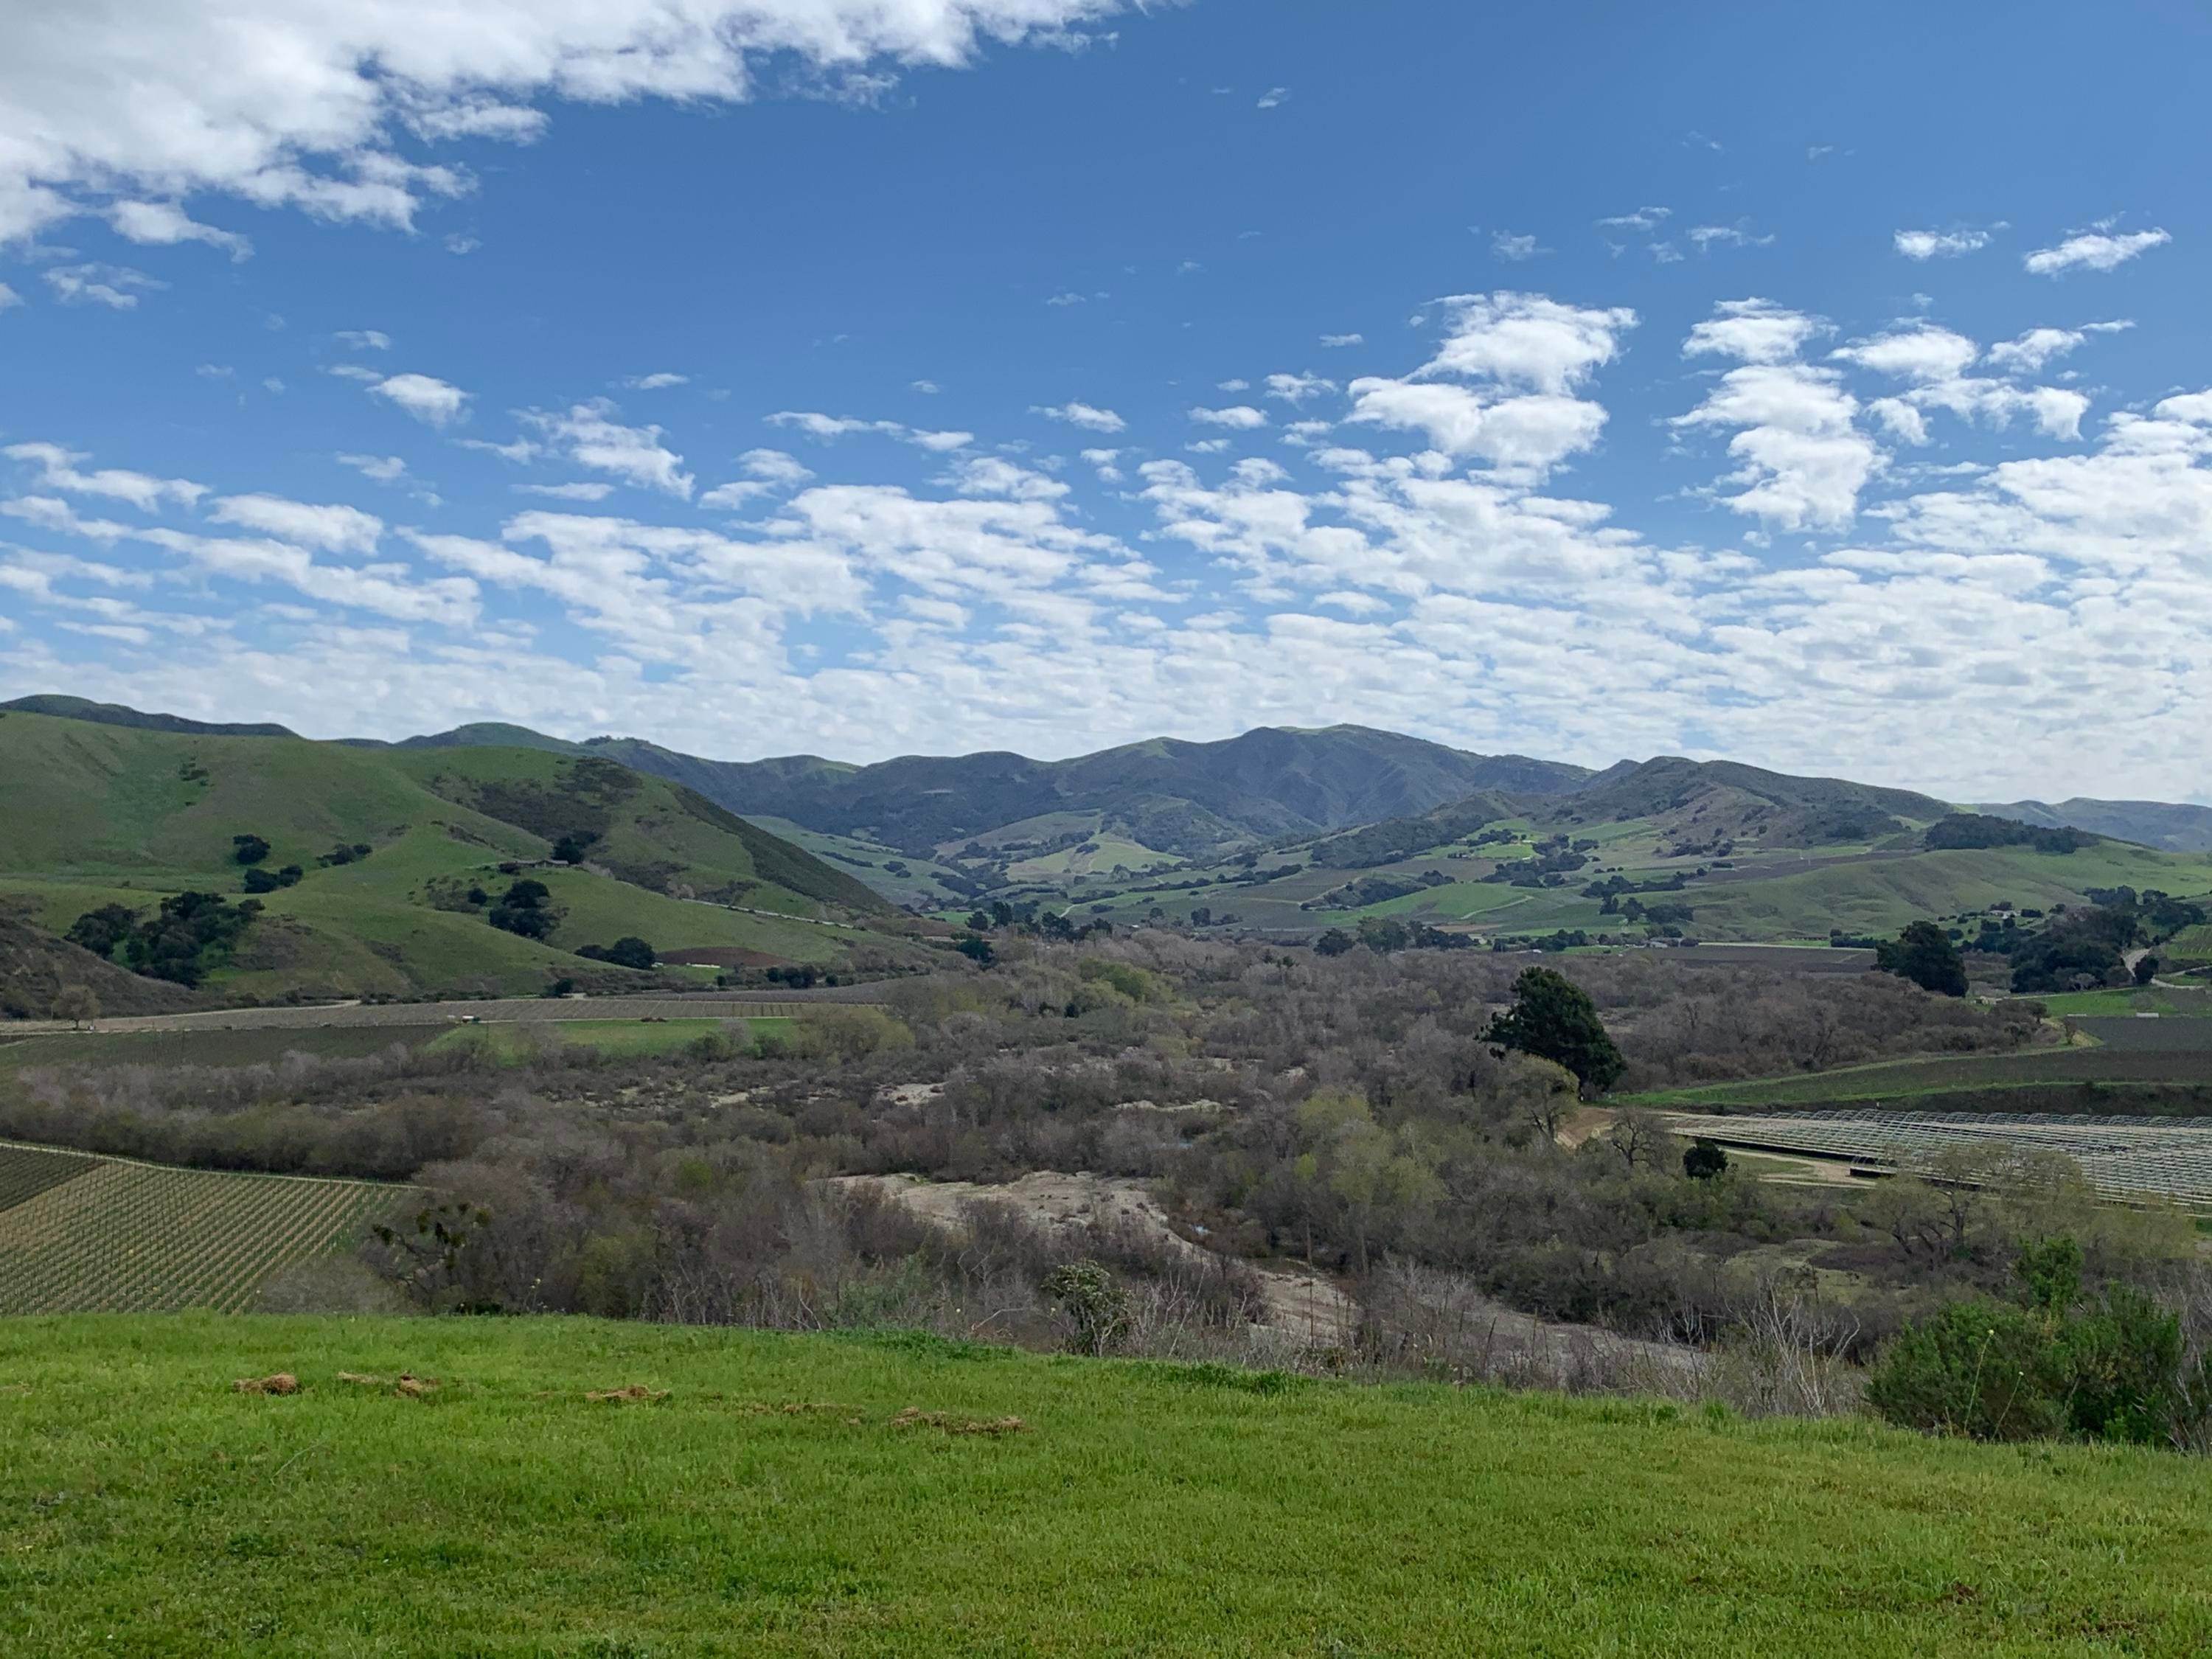 Farm and Ranch Properties for Sale at 7296 Santos Road Lompoc, California 93436 United States